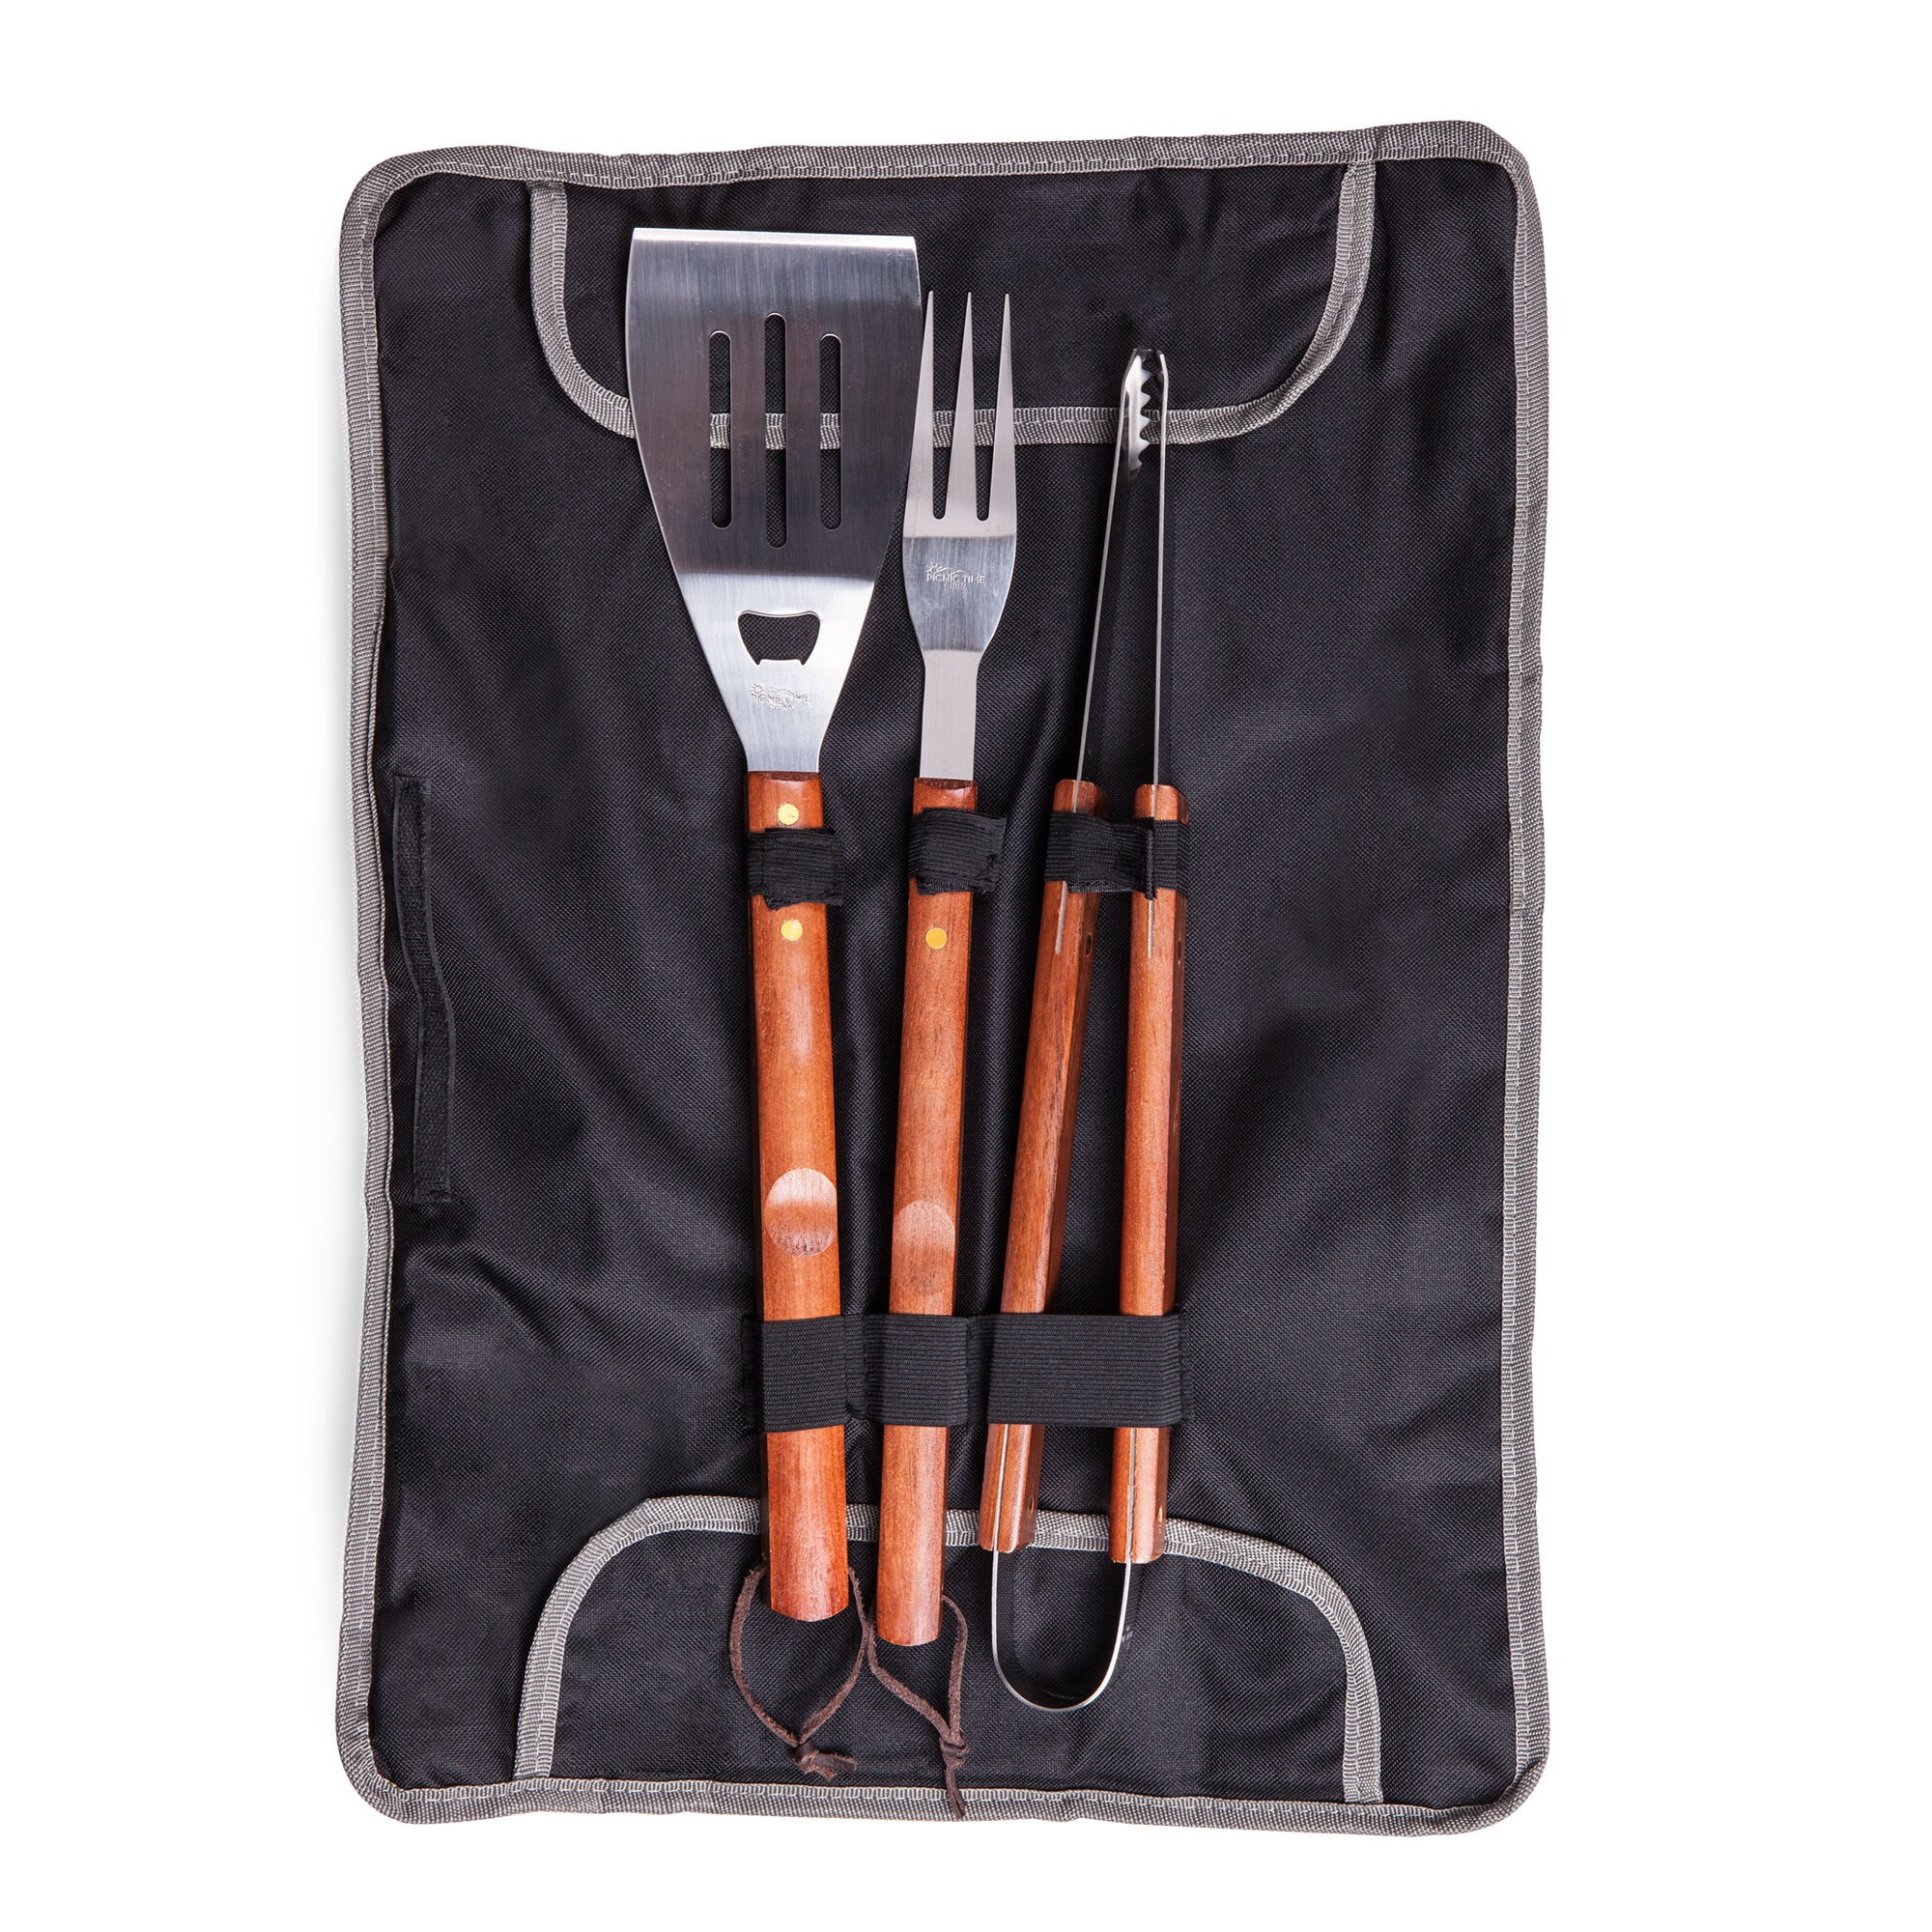 Washington State Team Sports Cougars 3 Piece BBQ Tool Set and Tote - image 2 of 2